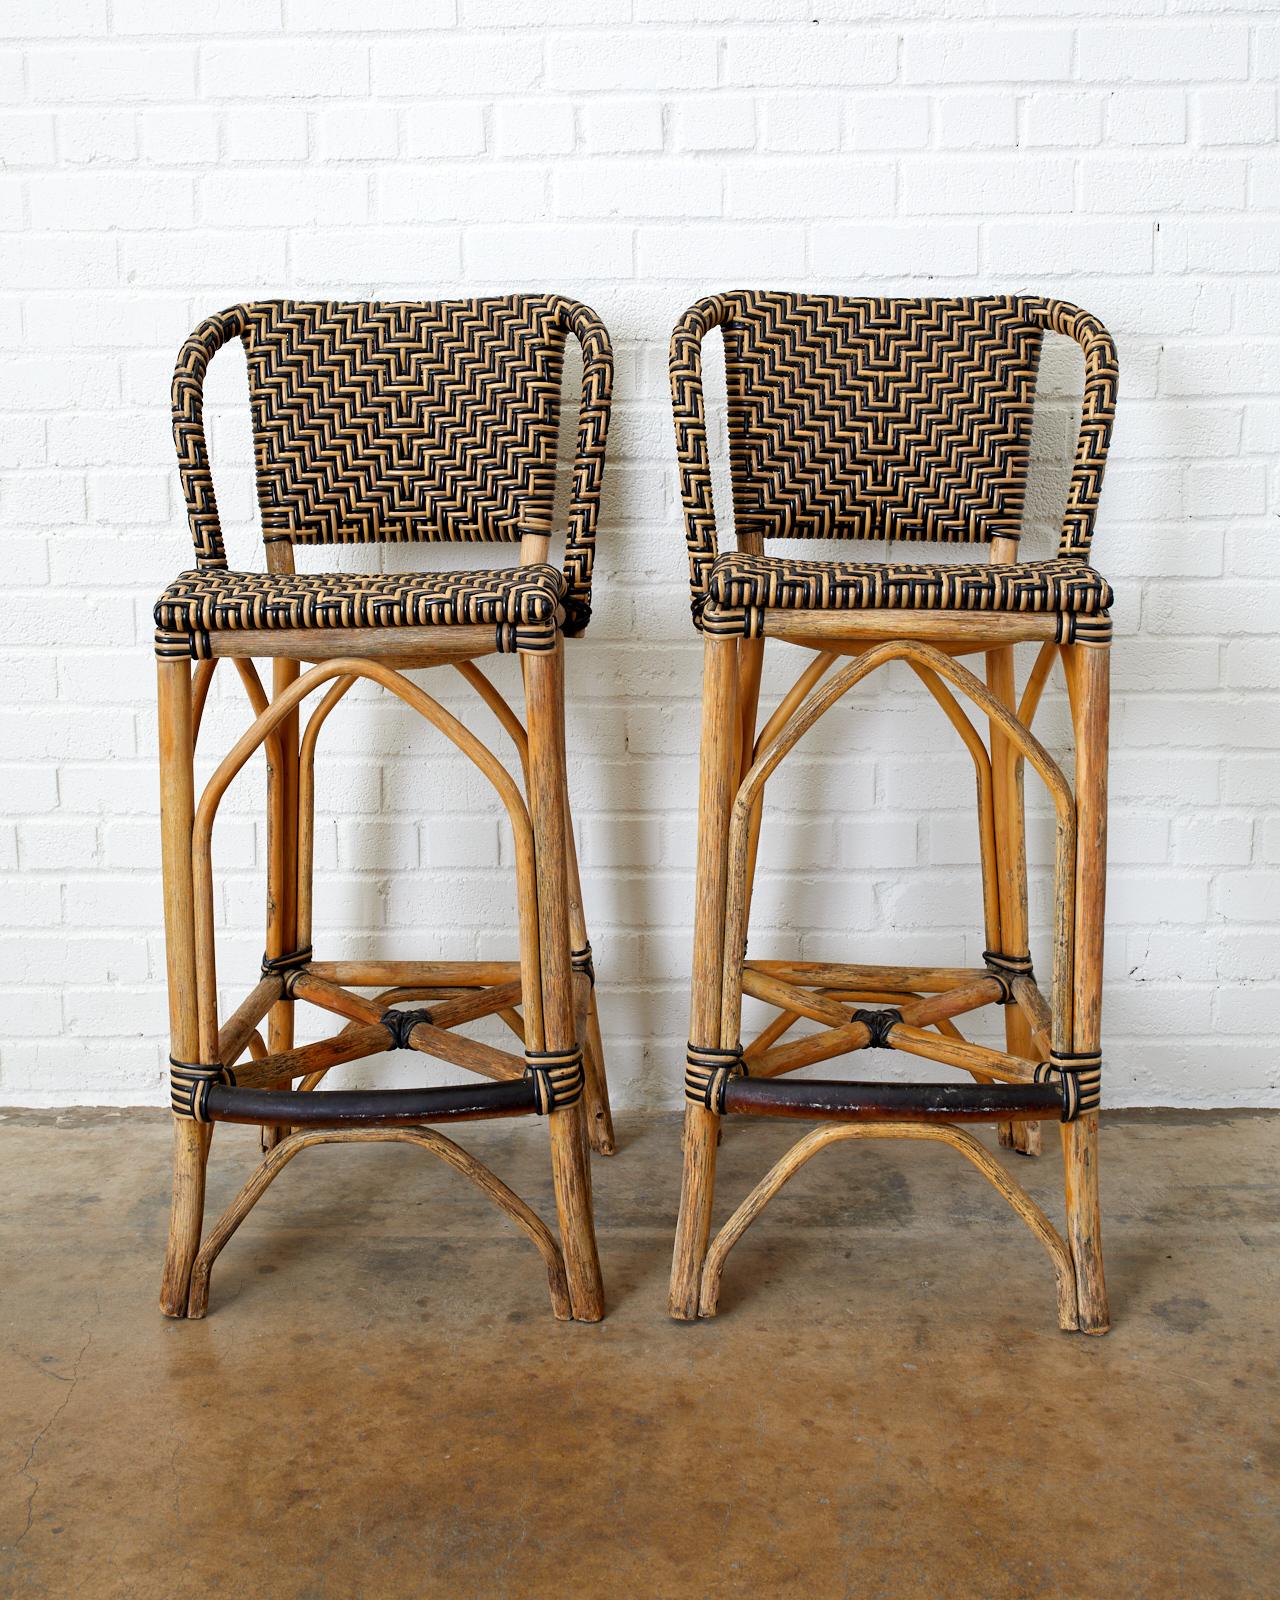 Handsome pair of bistro style patio garden bar stools. Constructed from bamboo rattan poles featuring a woven chevron pattern design made of wicker and synthetic rattan. Made by Palecek in the organic modern style after French Art Deco inspired